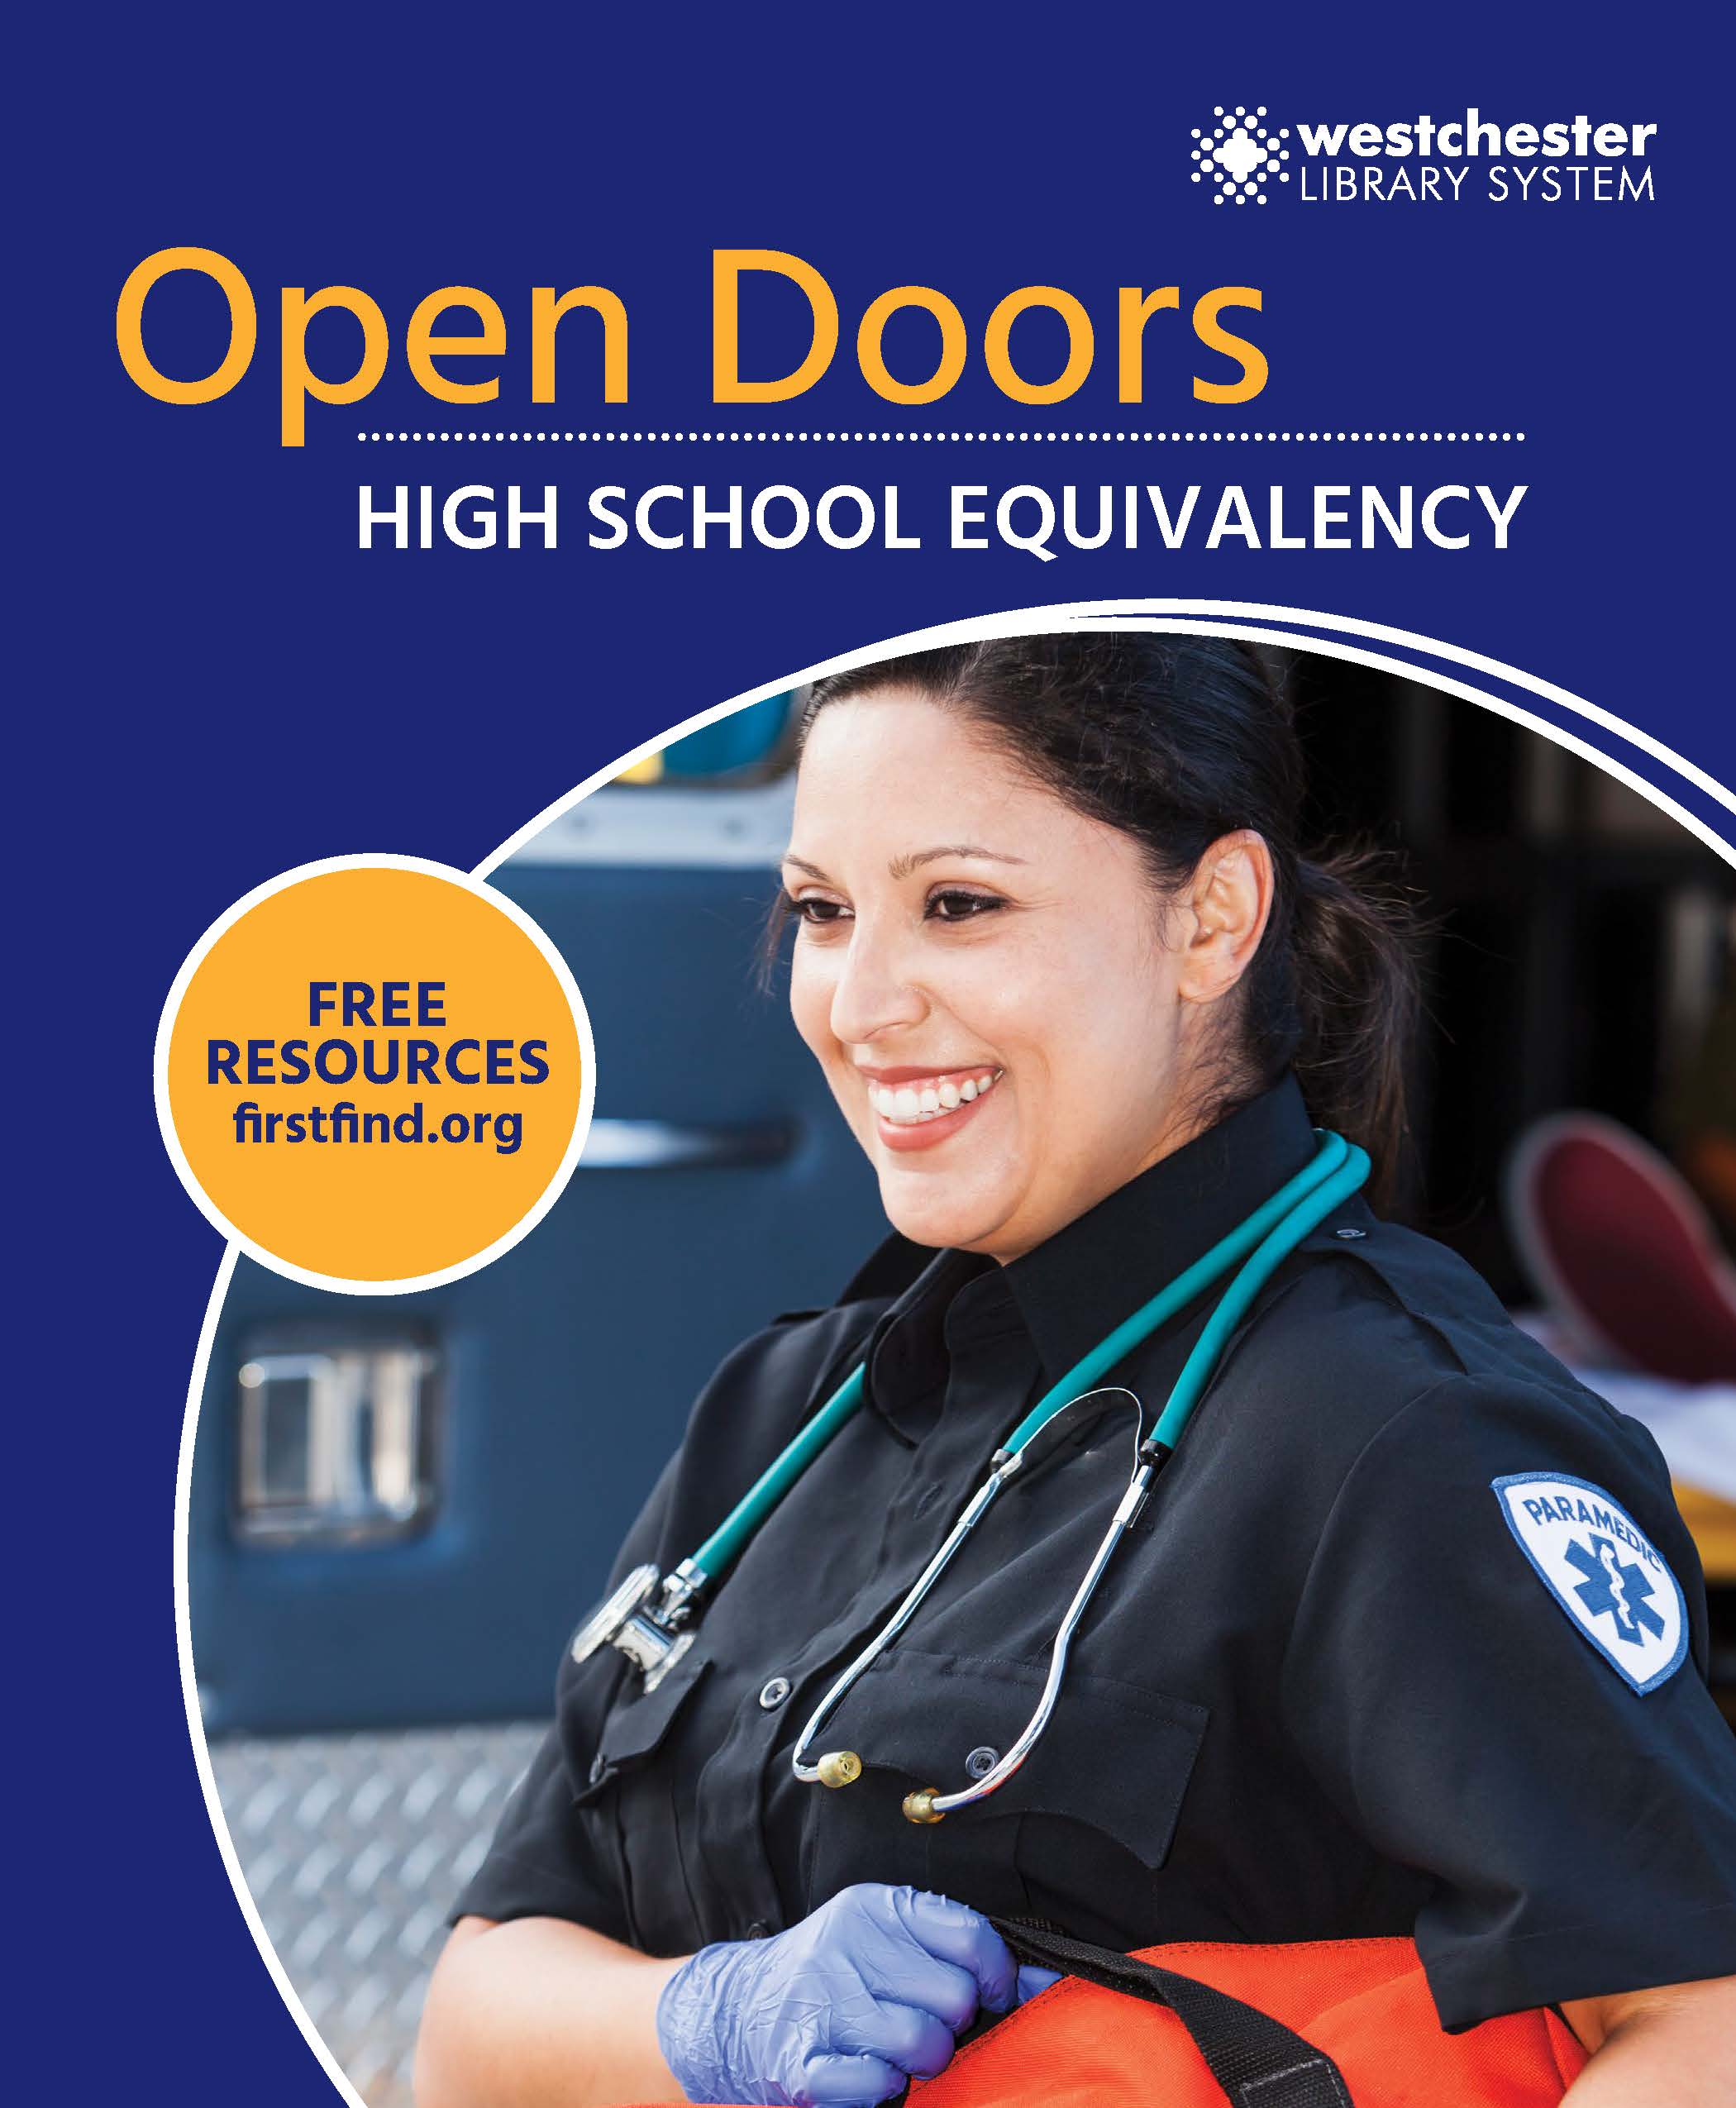 Cover image of High School Equivalency booklet click to download